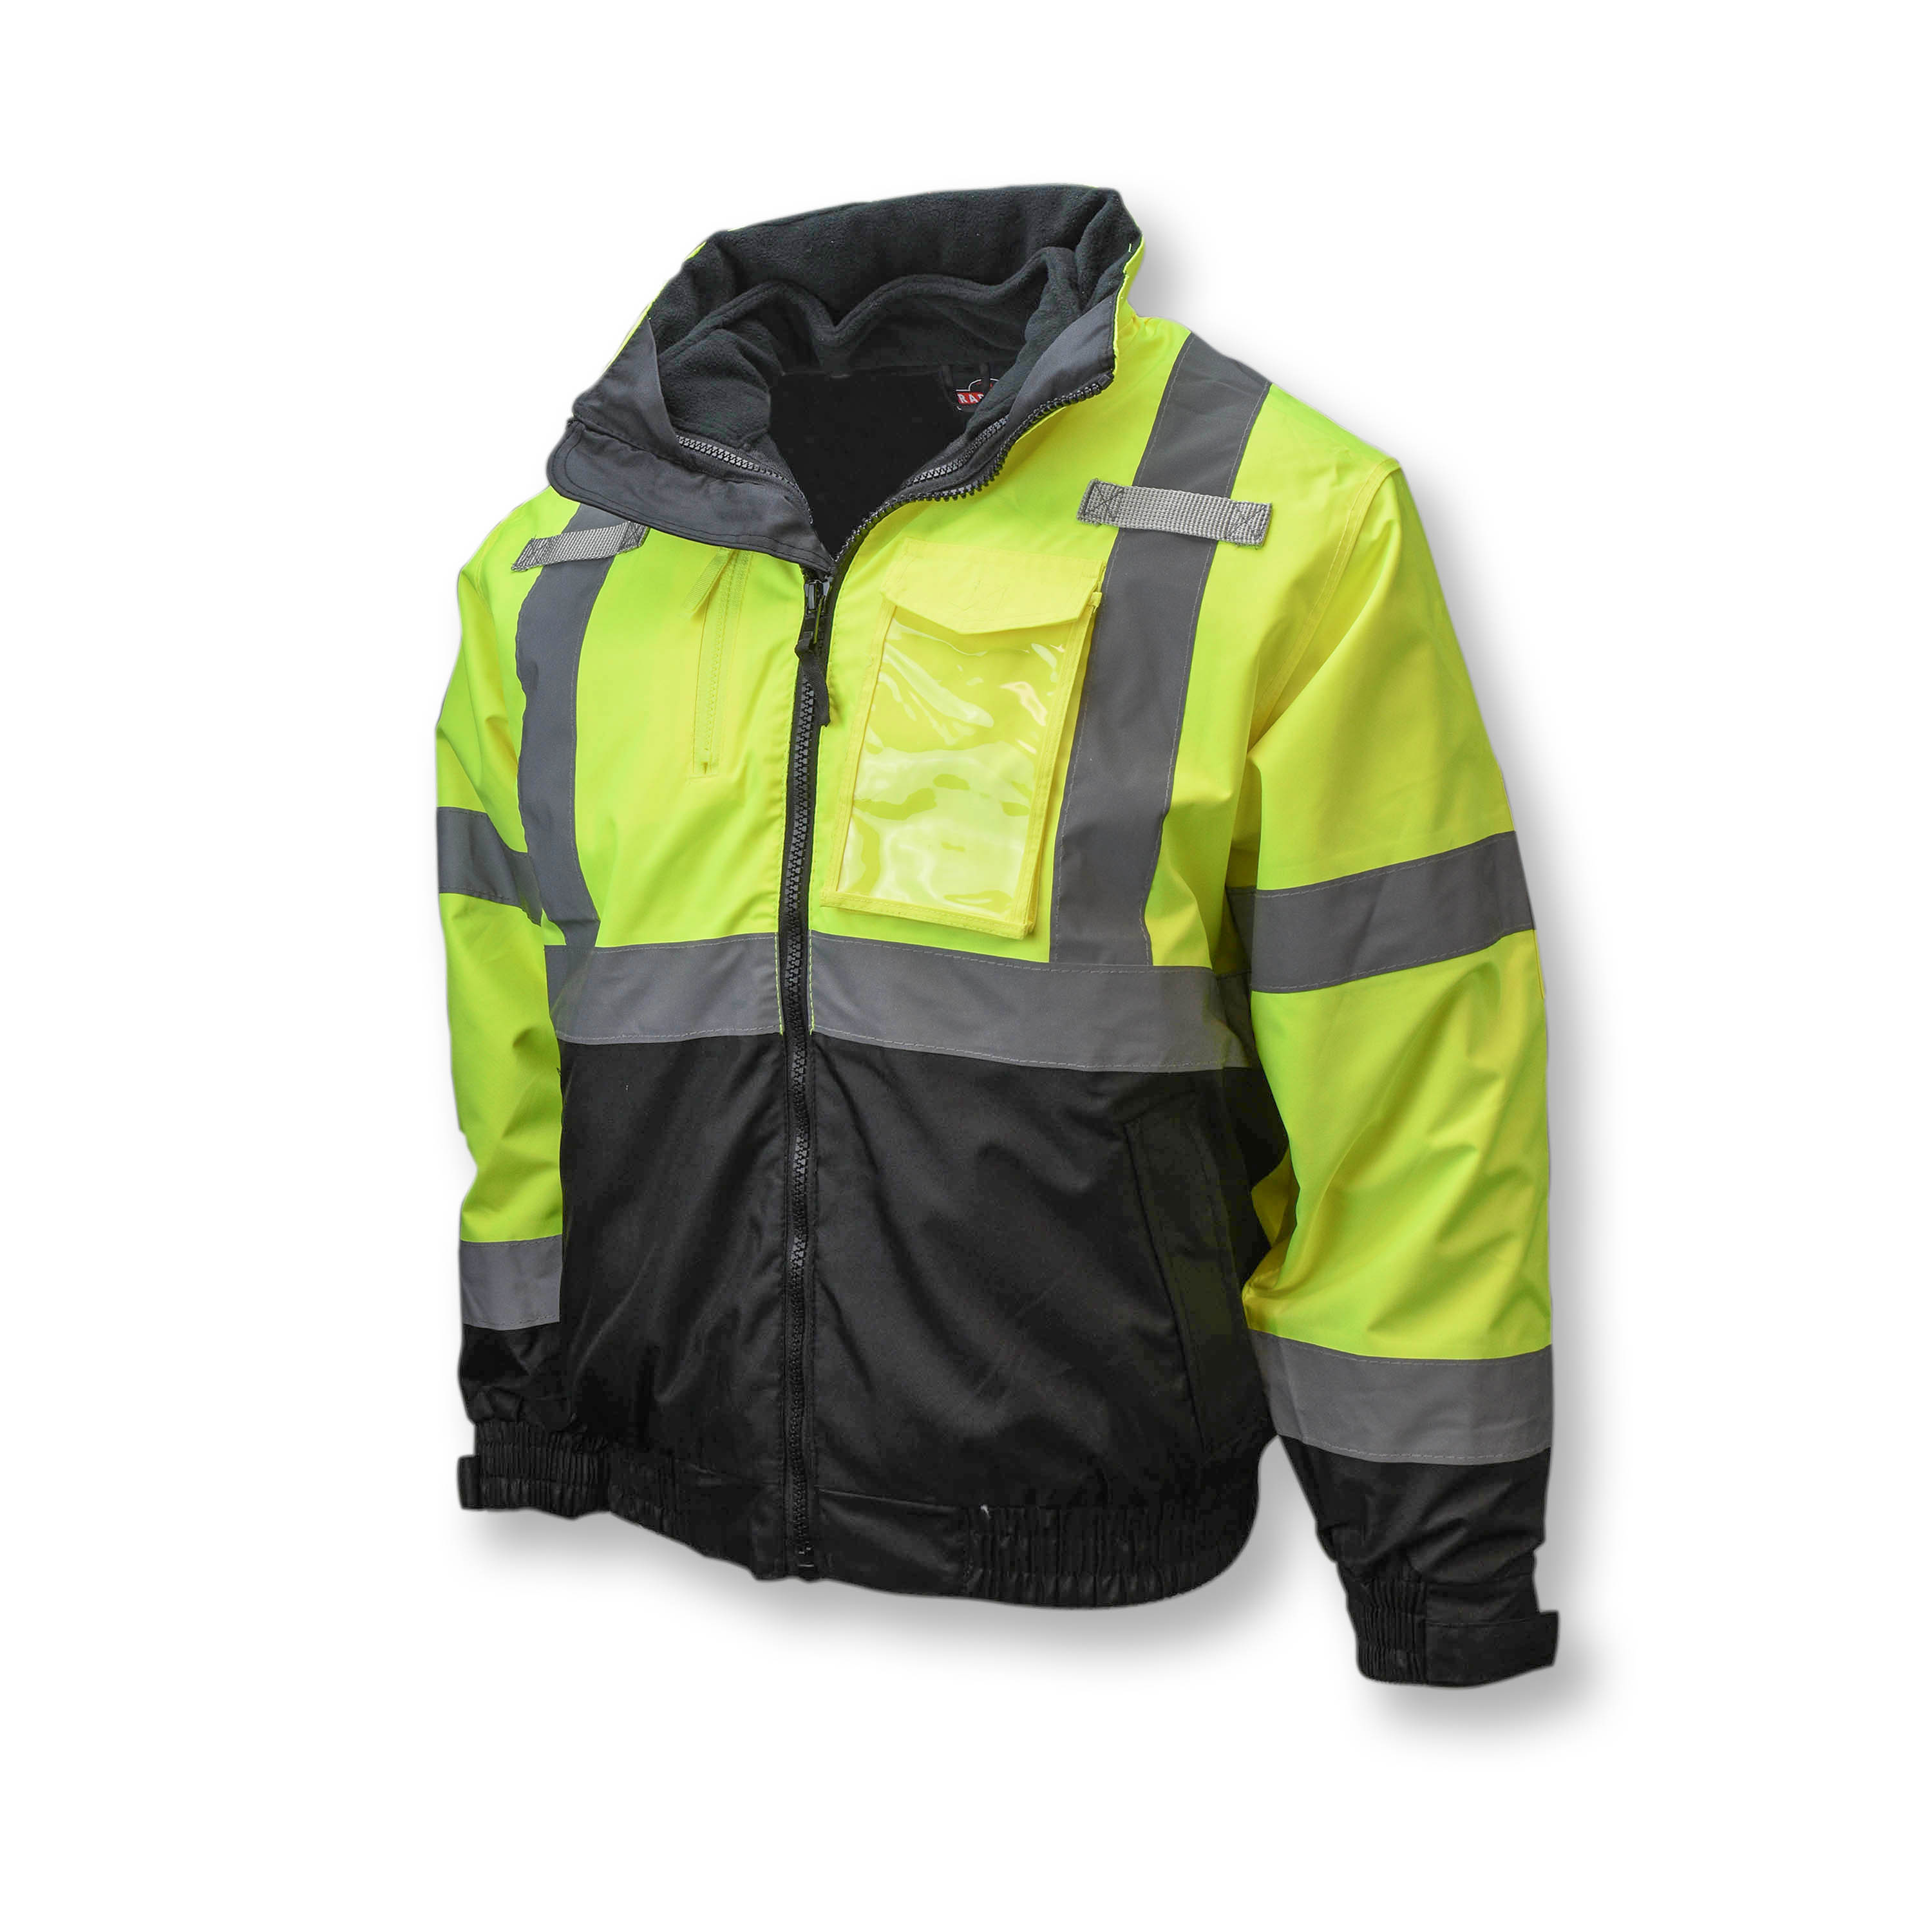 SJ210B Three-in-One Deluxe High Visibility Bomber Jacket - Green/Black Bottom - Size 2X - Hi-Visibility